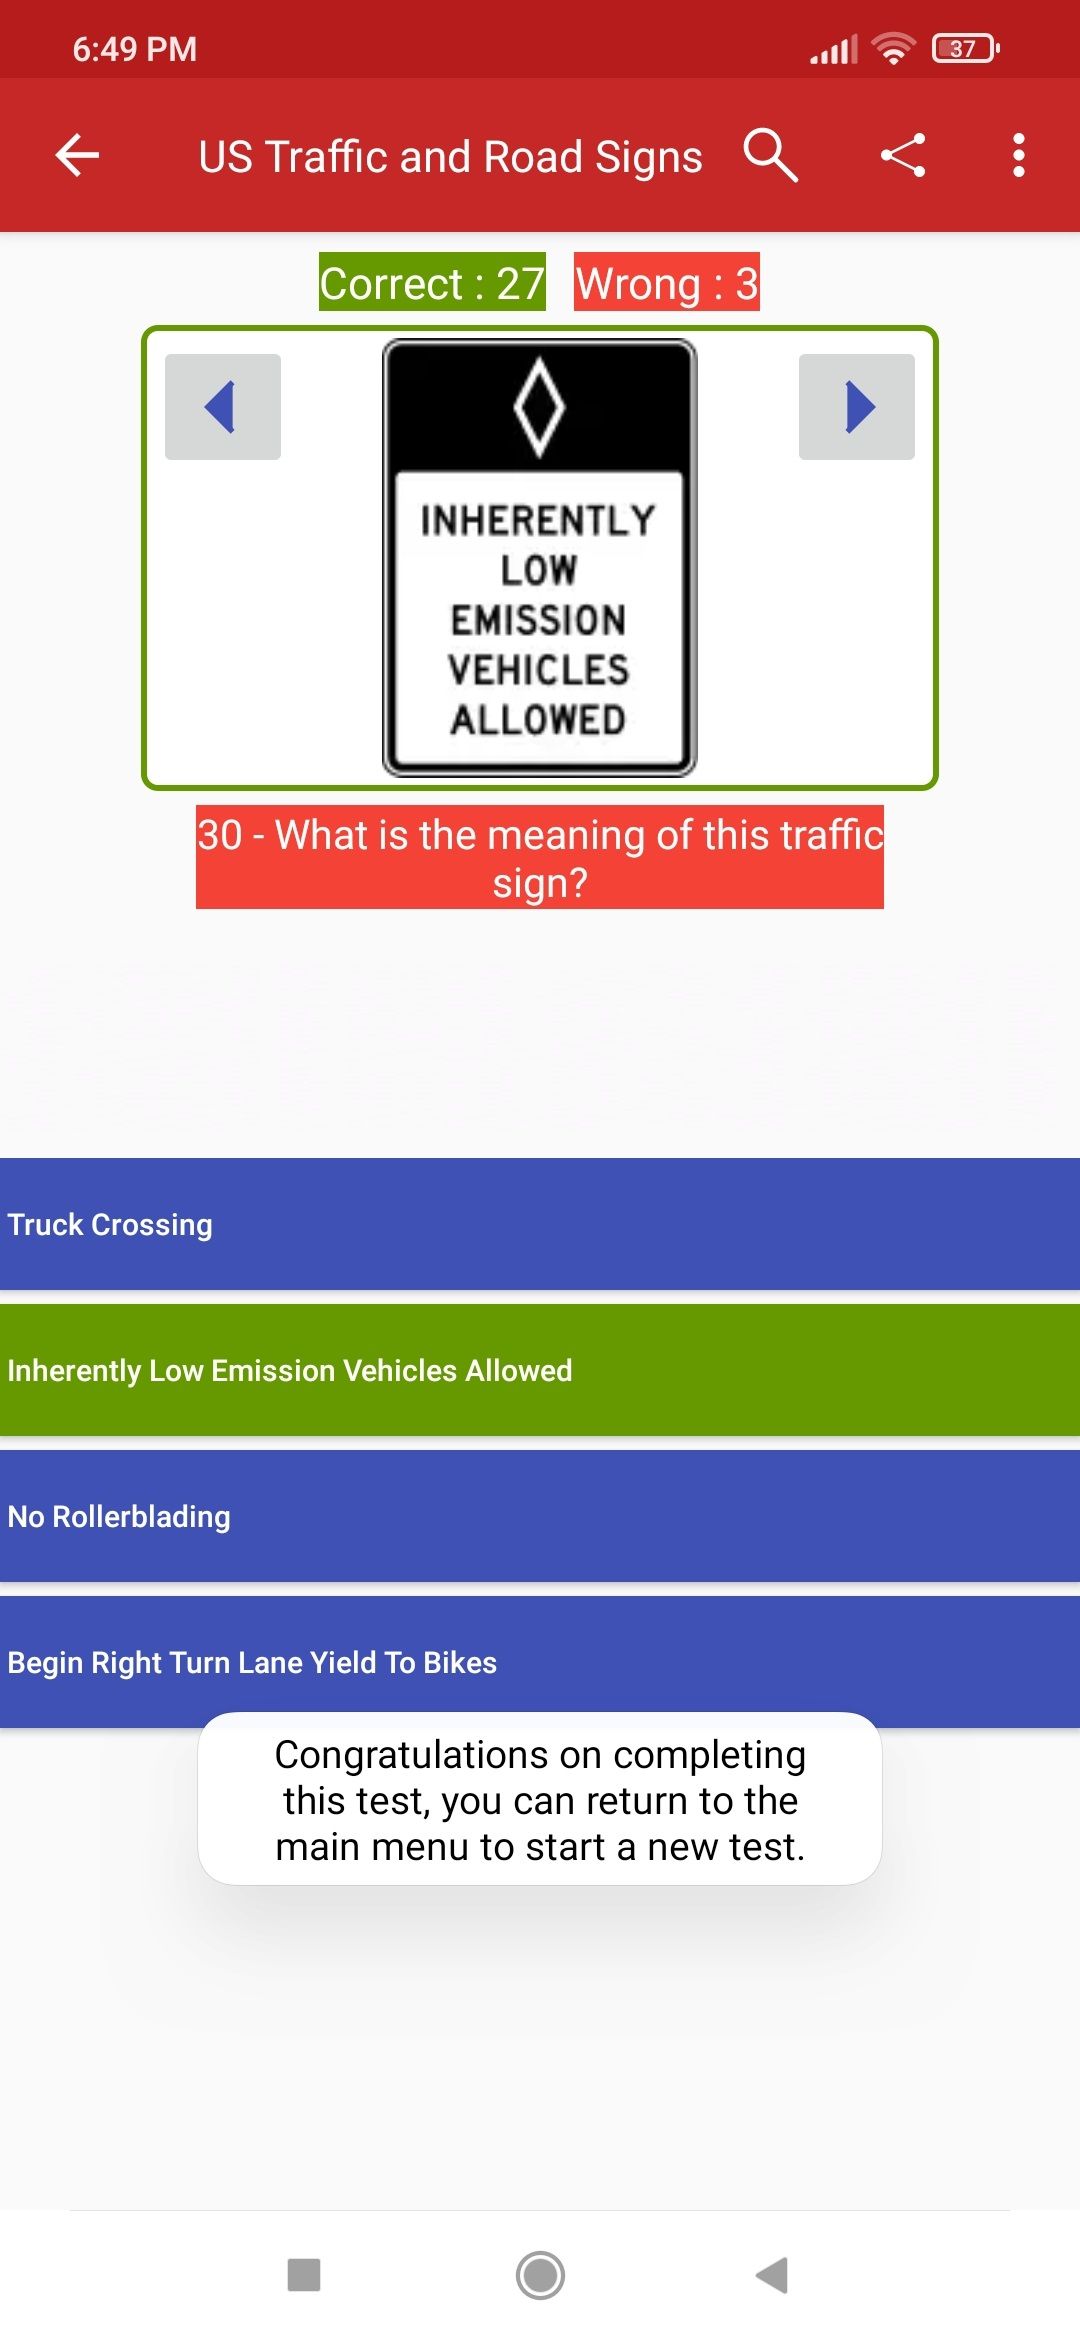 US Traffic and Road Signs test page